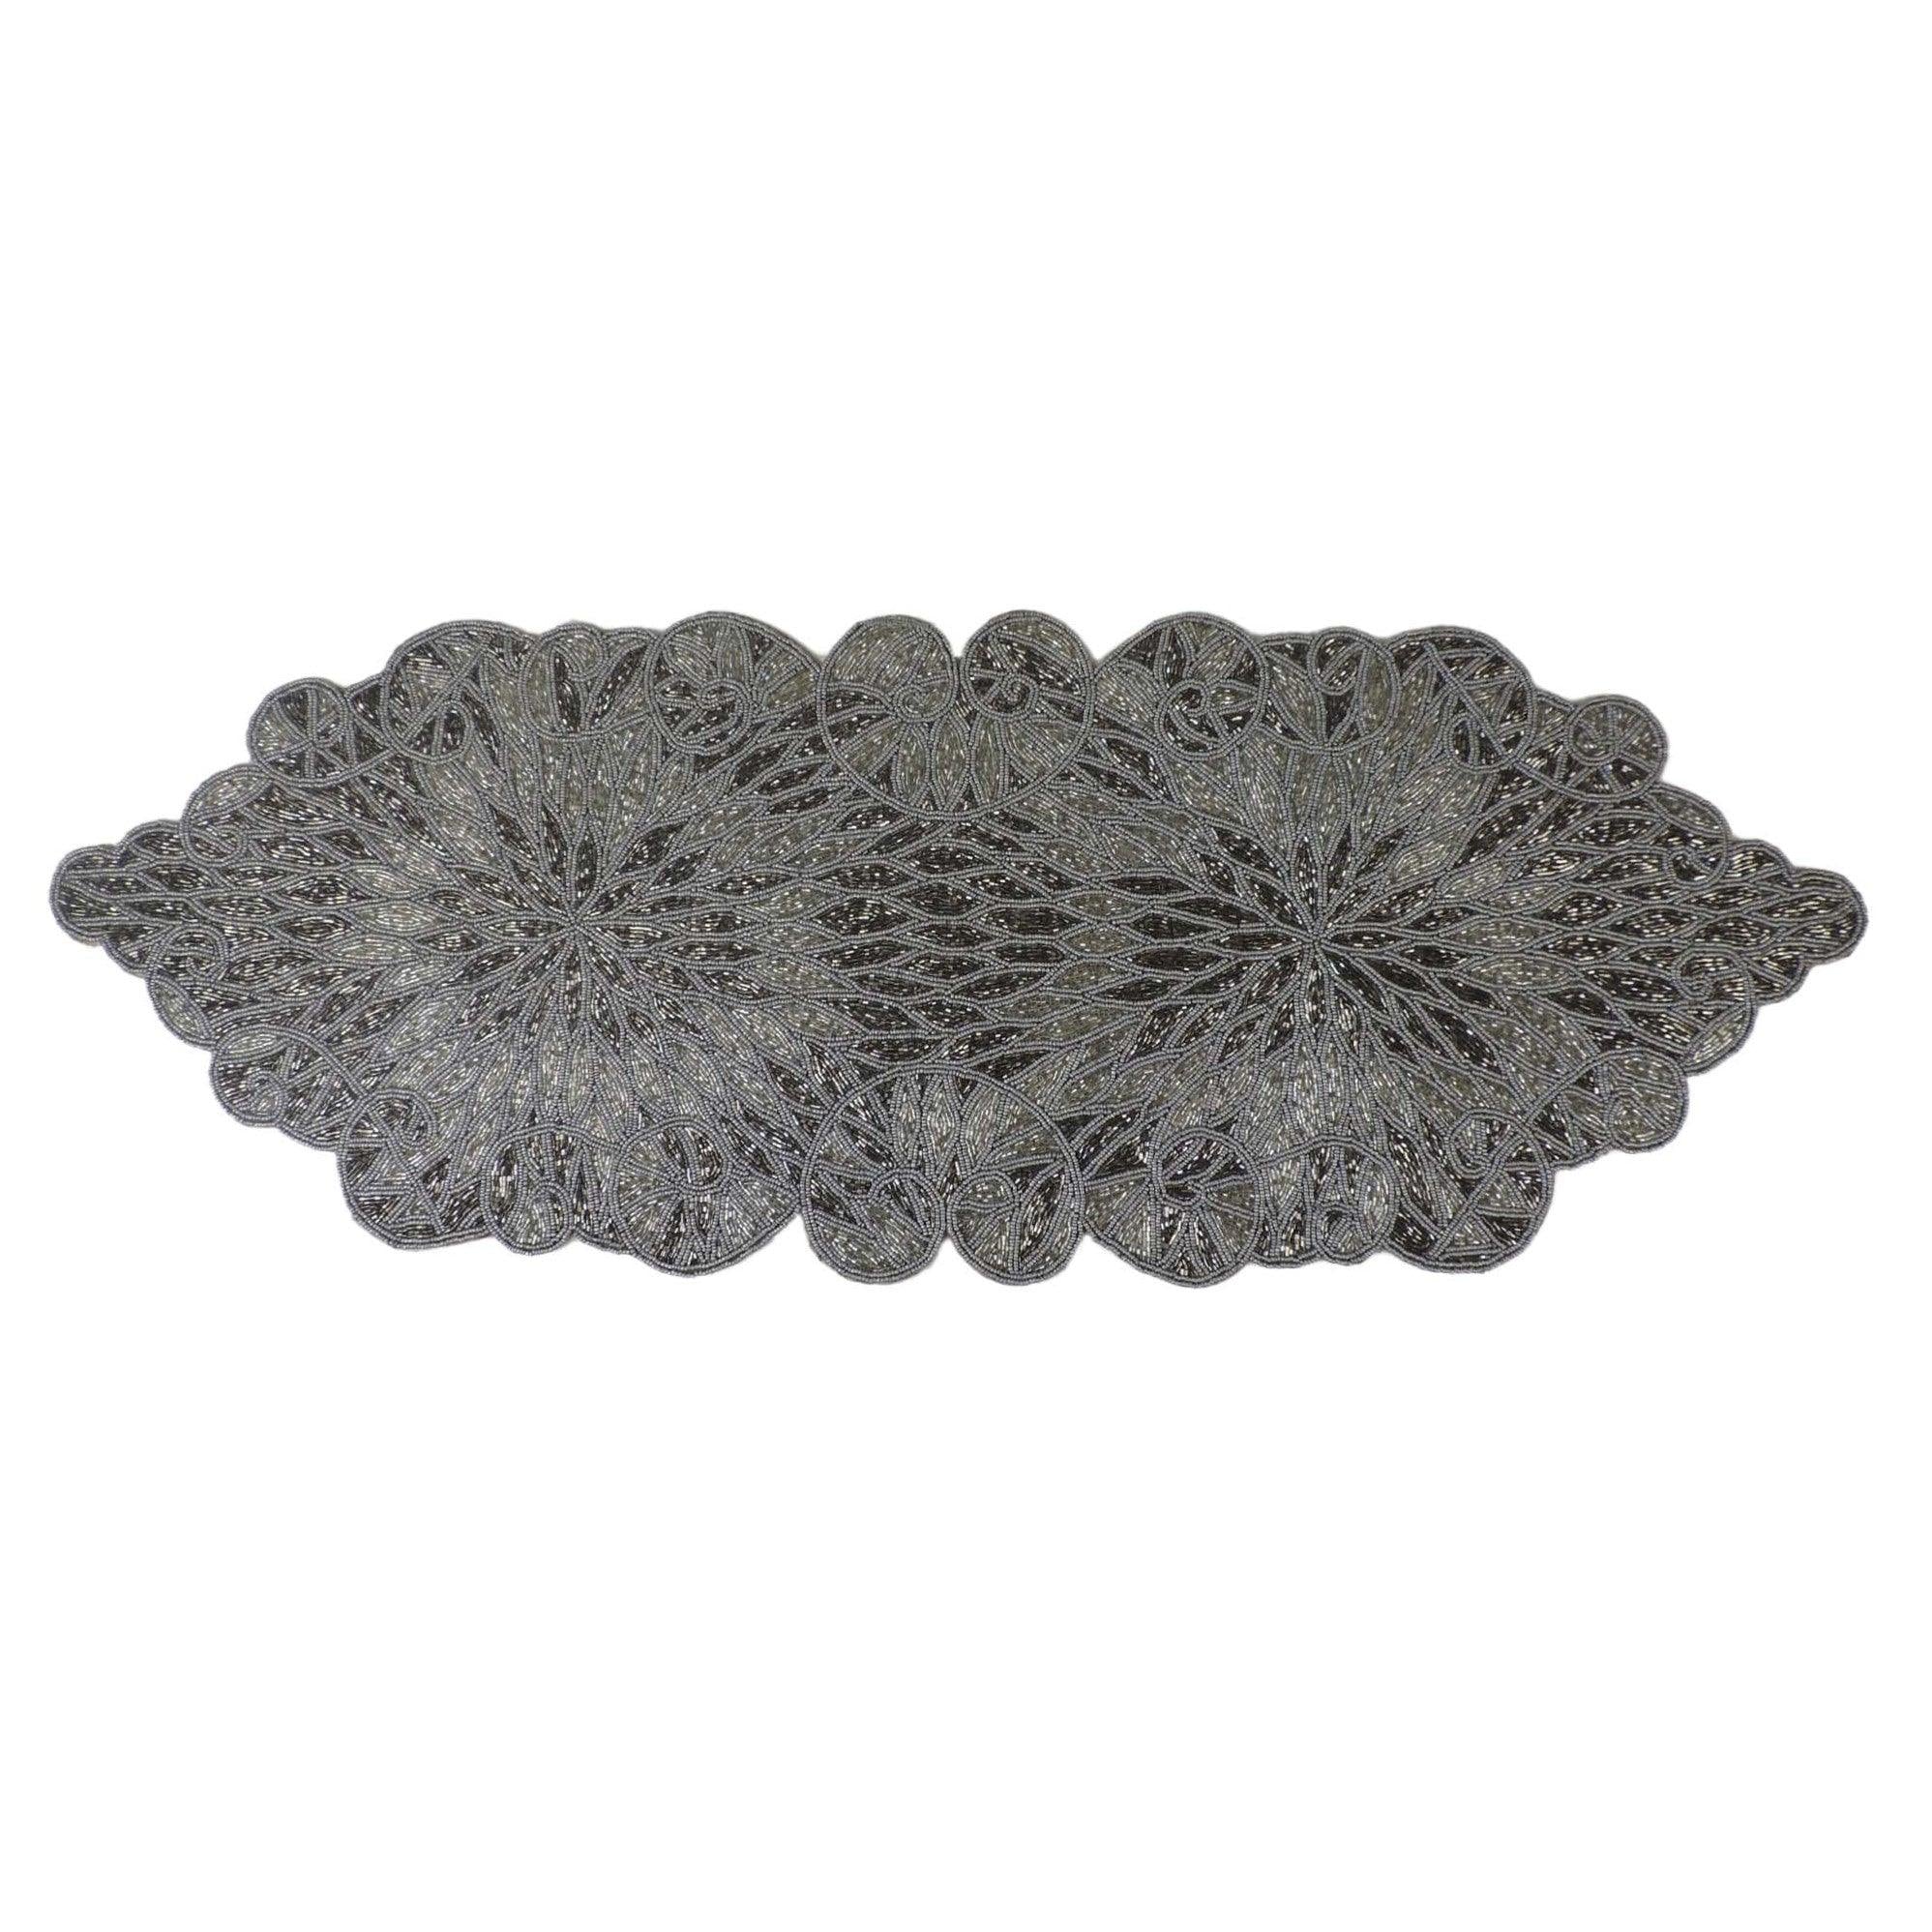 Elegance Glass Bead Embroidered Table Runner<br>Size: 35" x Size: 13"<br>Color: Smoke Silver - Trunkin' USA